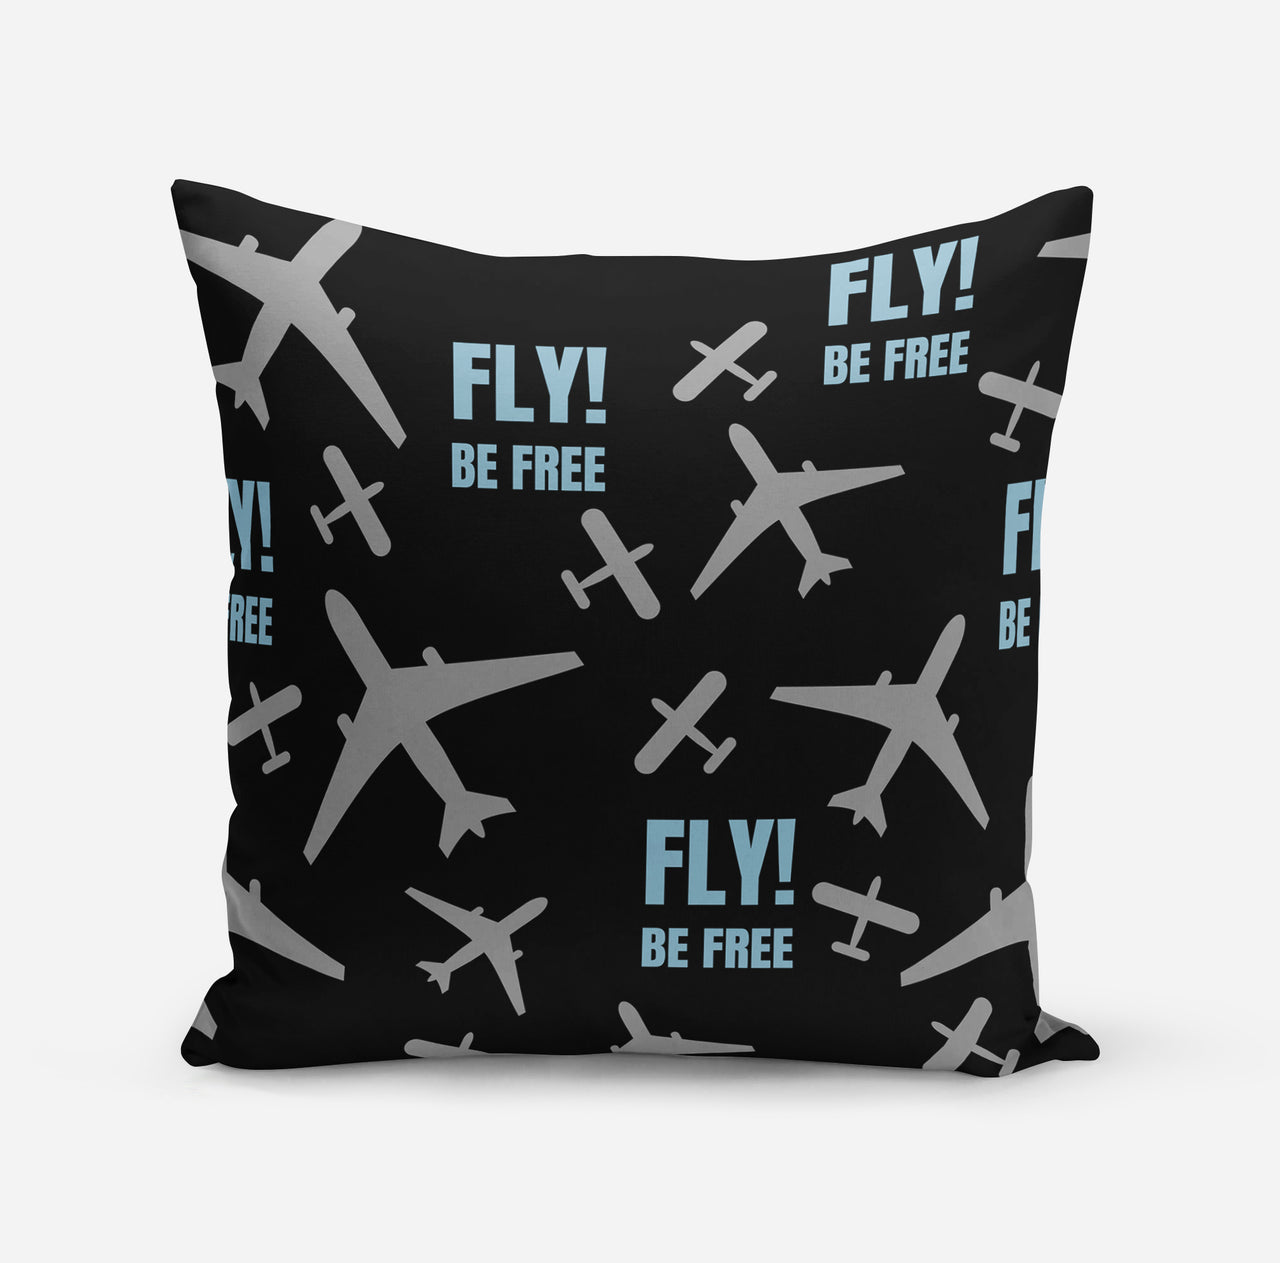 Fly Be Free Designed Pillows